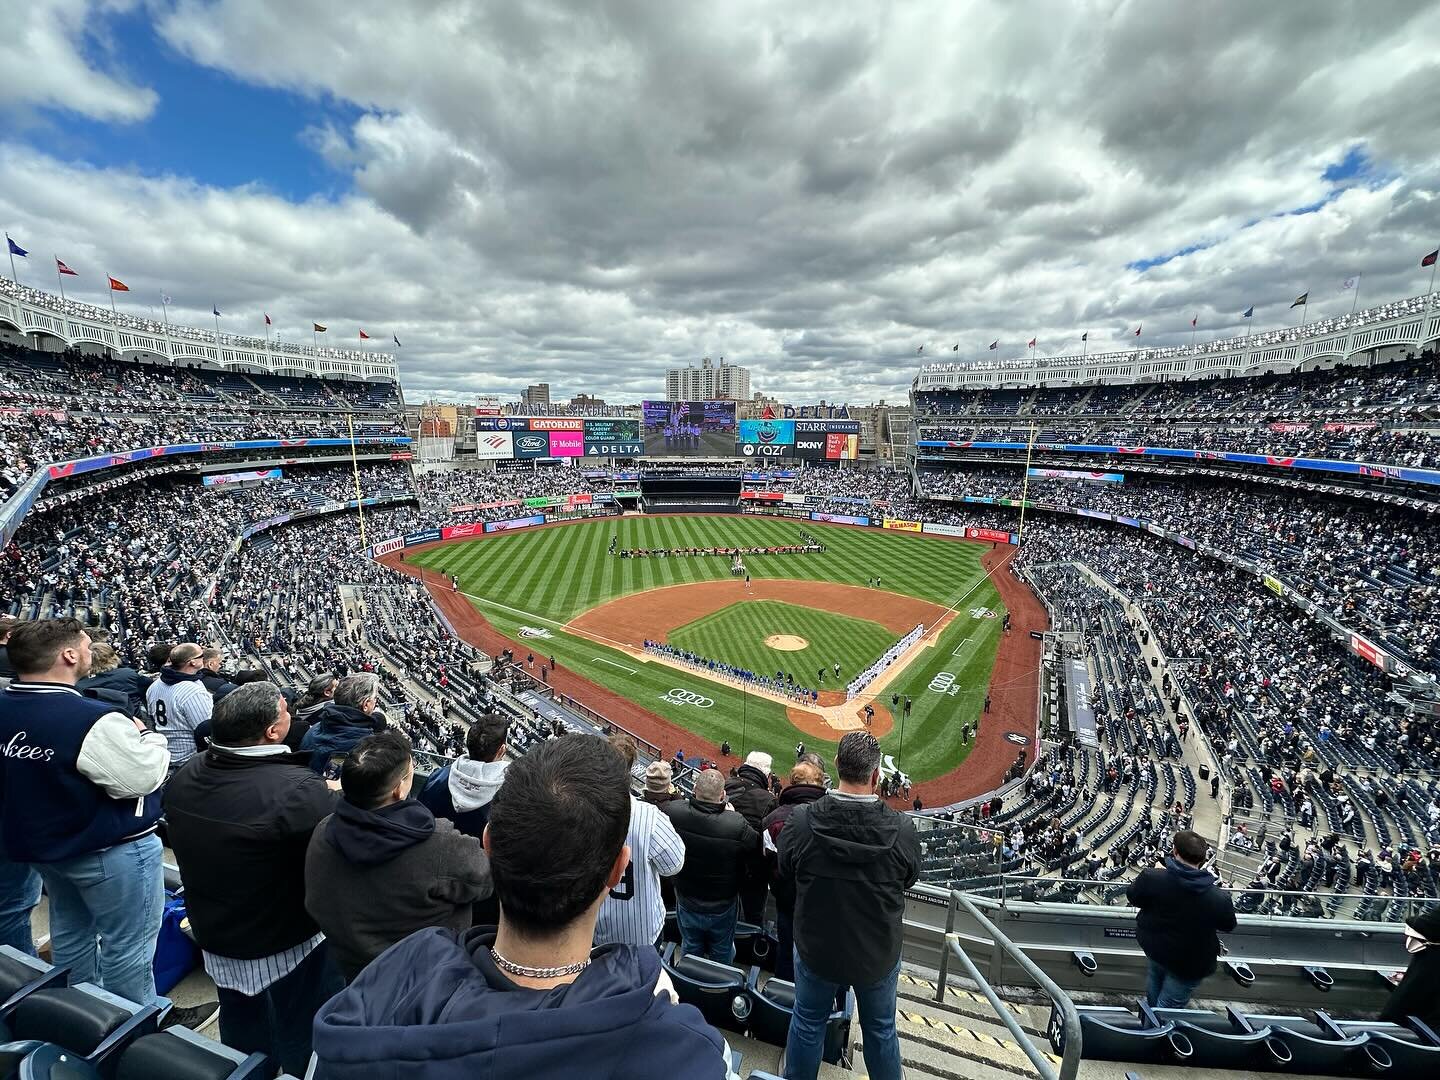 What a day! Earthquake in the morning was on everybody&rsquo;s mind but we made it to Opening Day at Yankee Stadium! #earthquake #nyyankees #homeinspectorlife